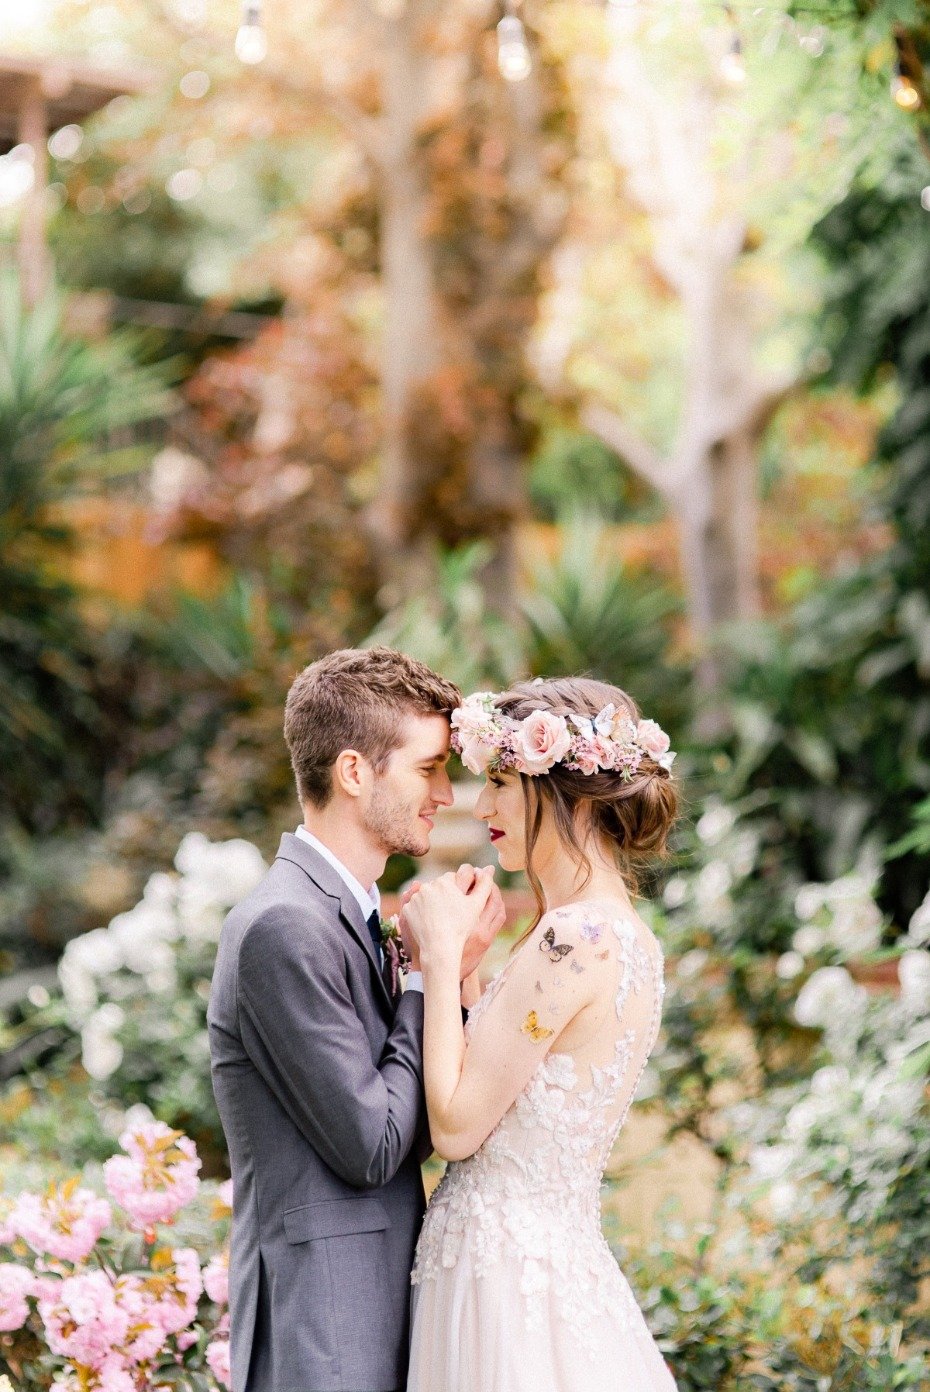 Butterfly Wedding Ideas That Make Our Hearts Flutter